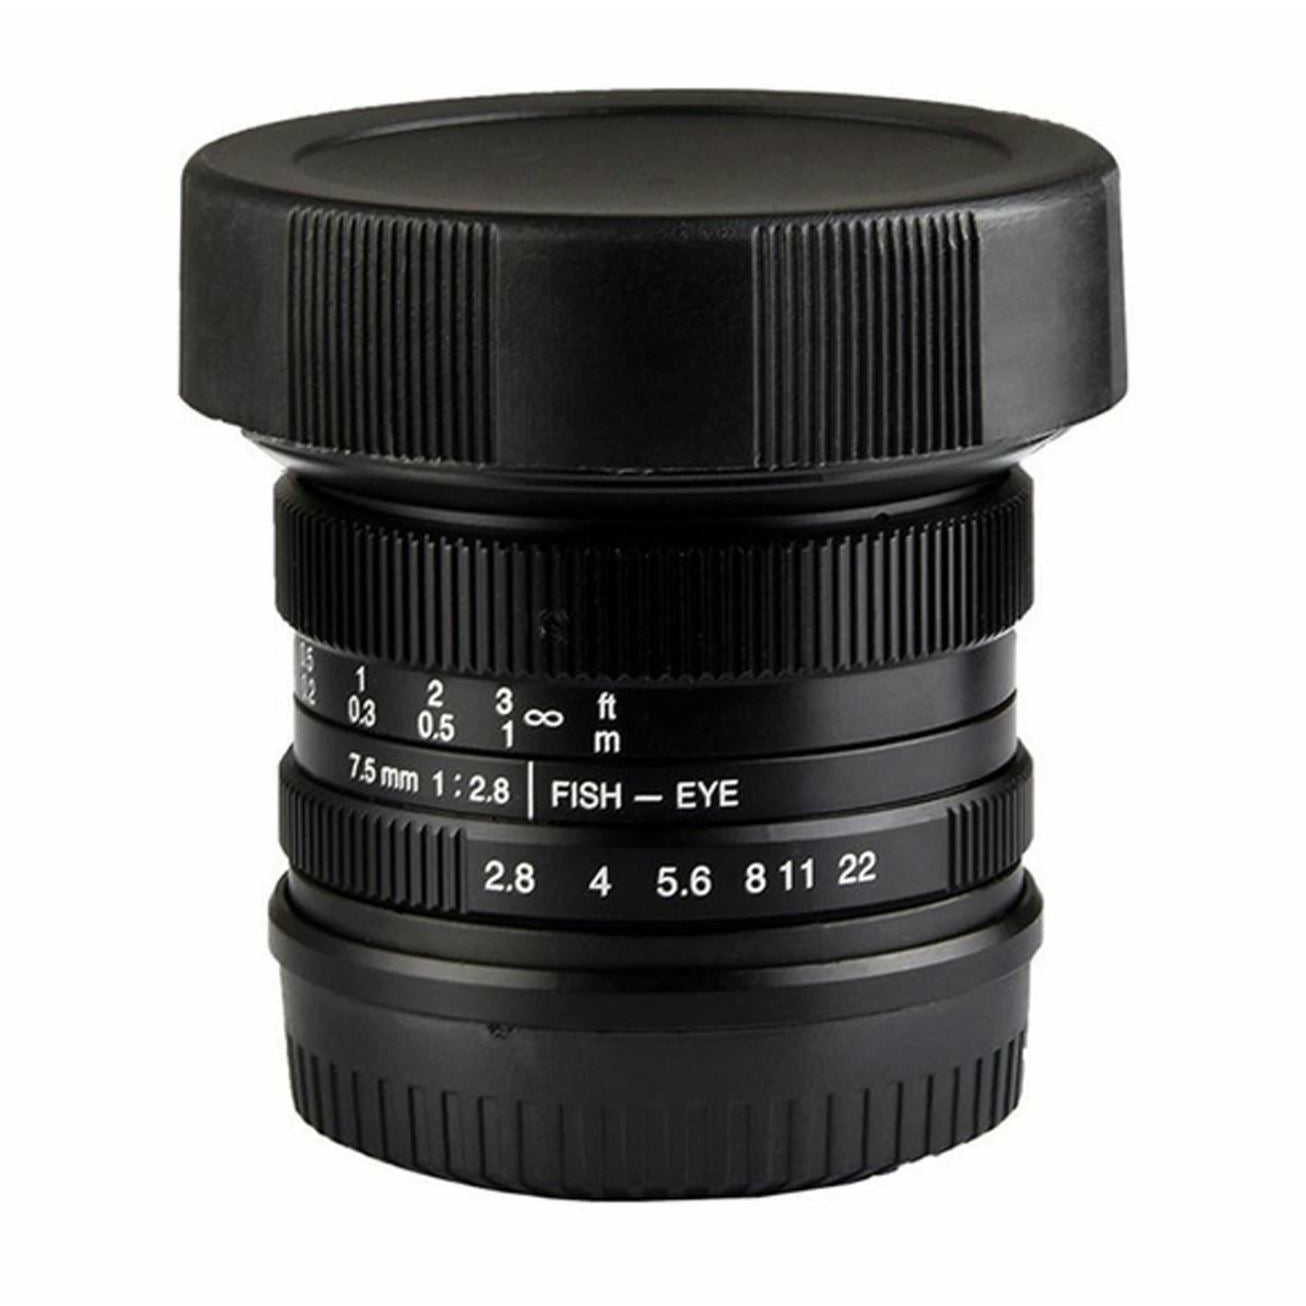 7Artisans 7.5mm f2.8 APS-C Manual Fisheye Prime Lens for Fujifilm X Mount Mirrorless Cameras with Protective Lens Cap Removable Lens Hood